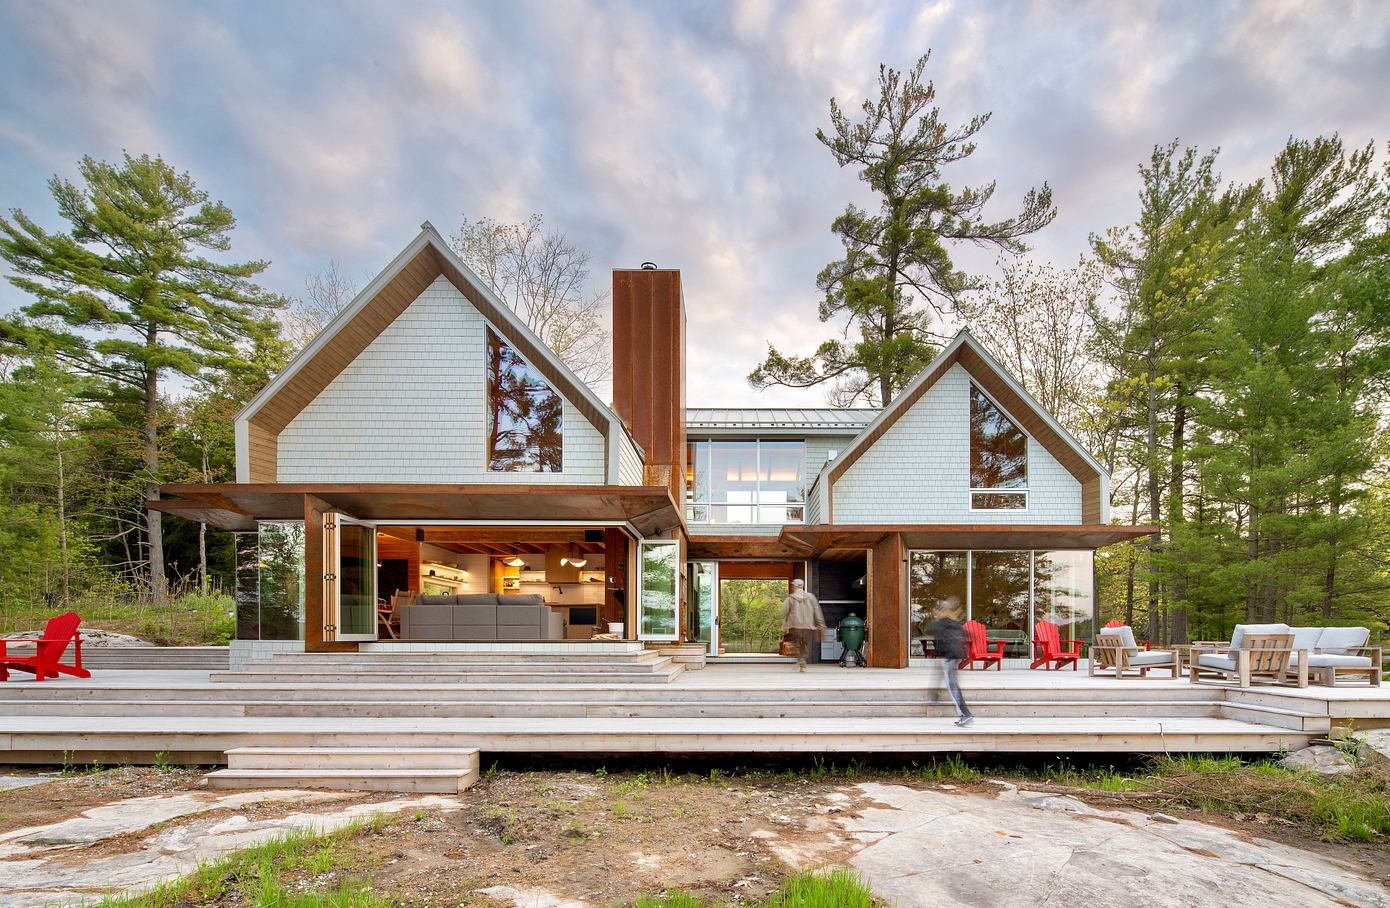 Six Mile Lake Cottage: Blurring the Lines Between Nature and Design